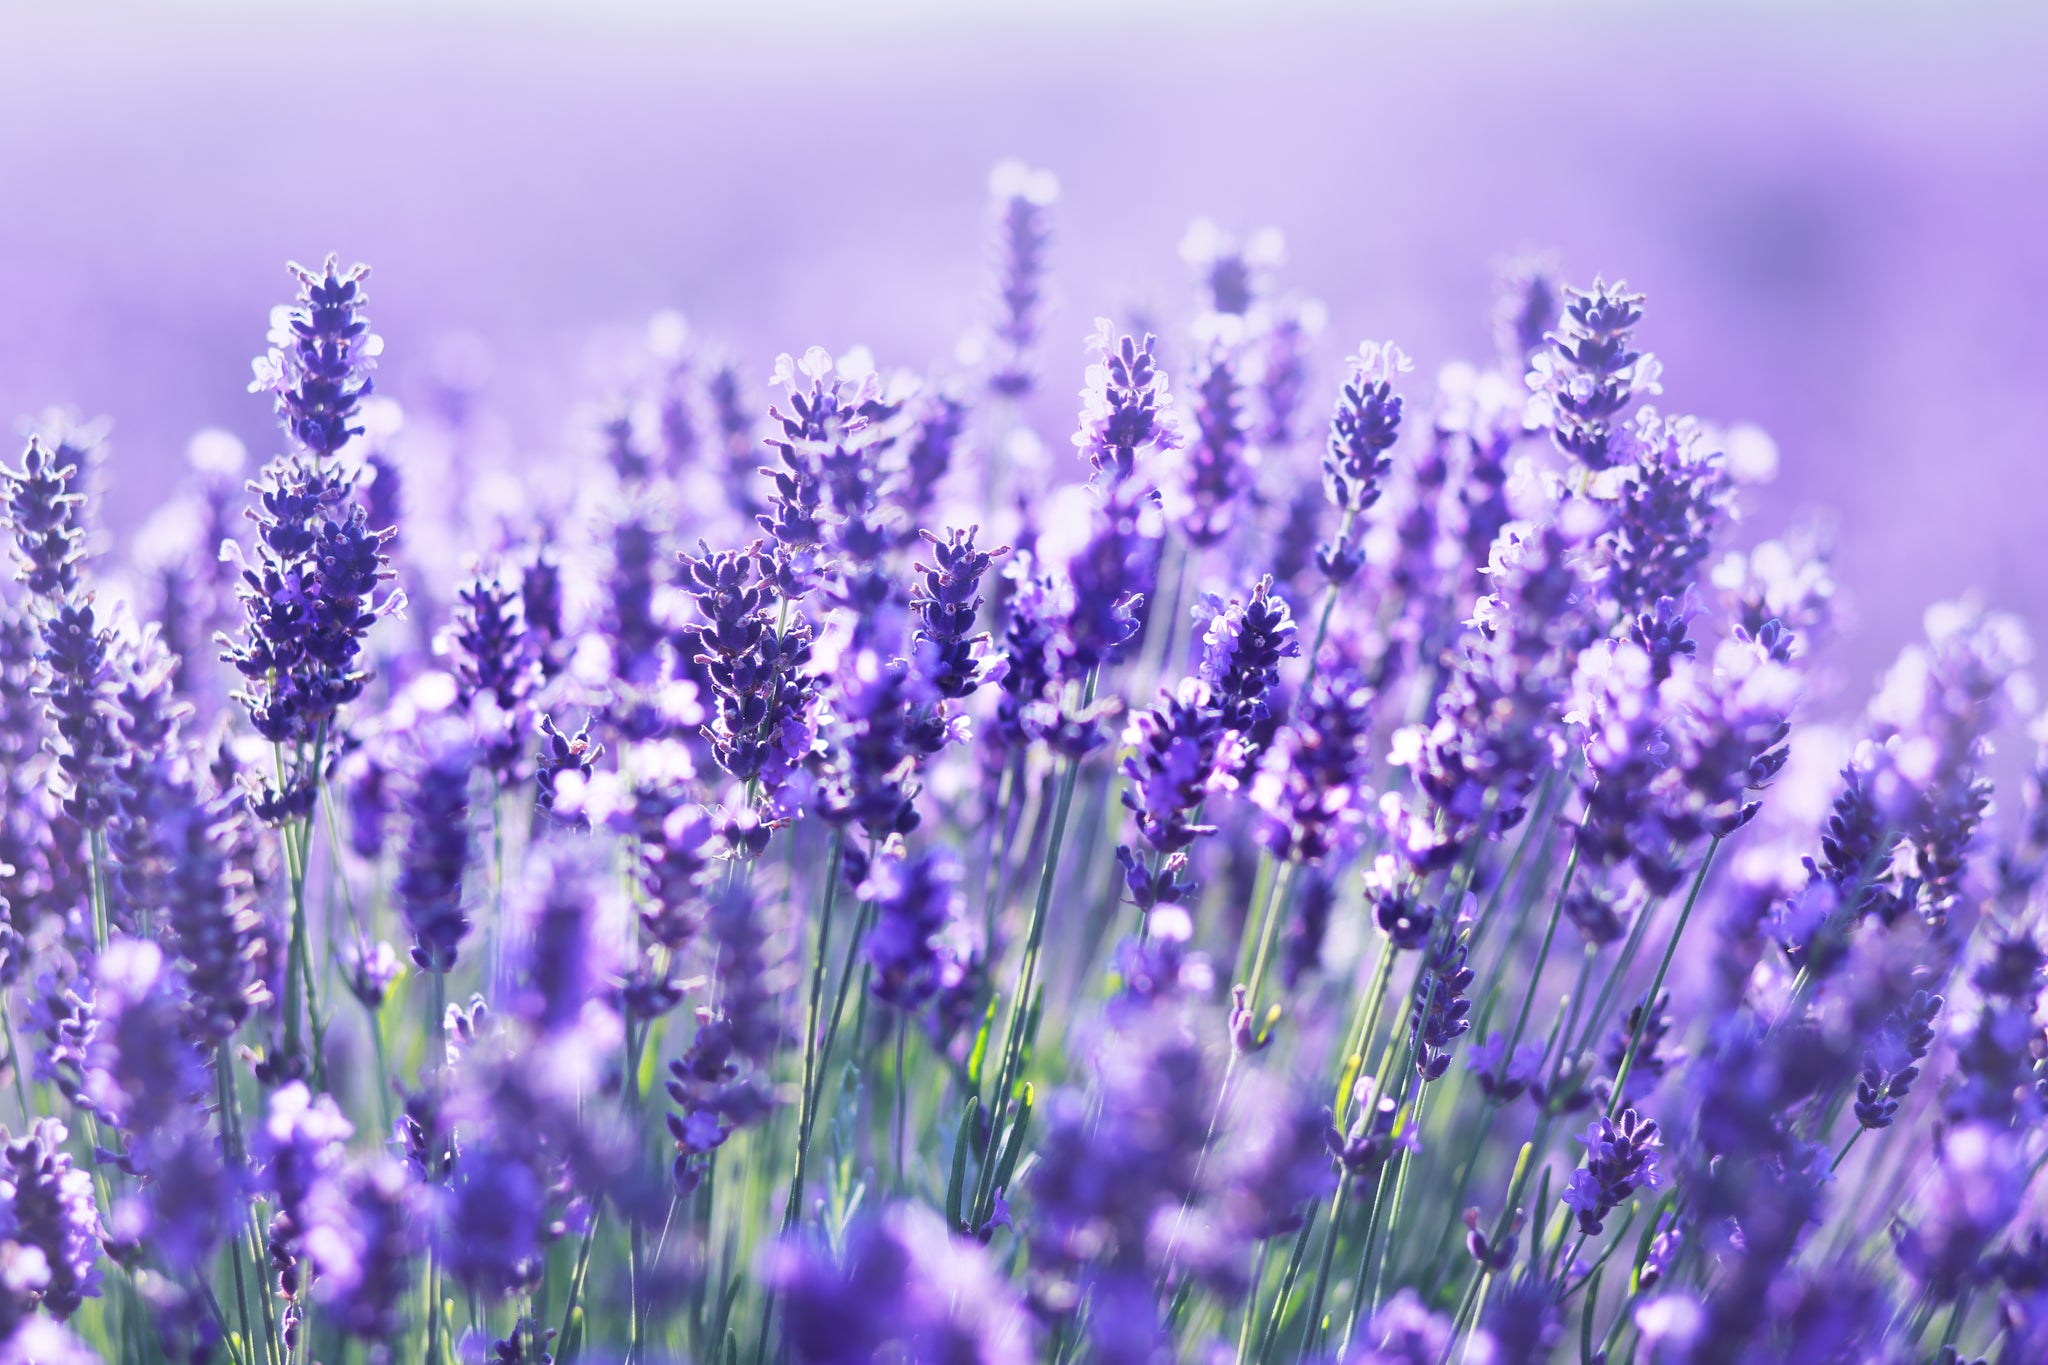 Why Lavender is so powerful